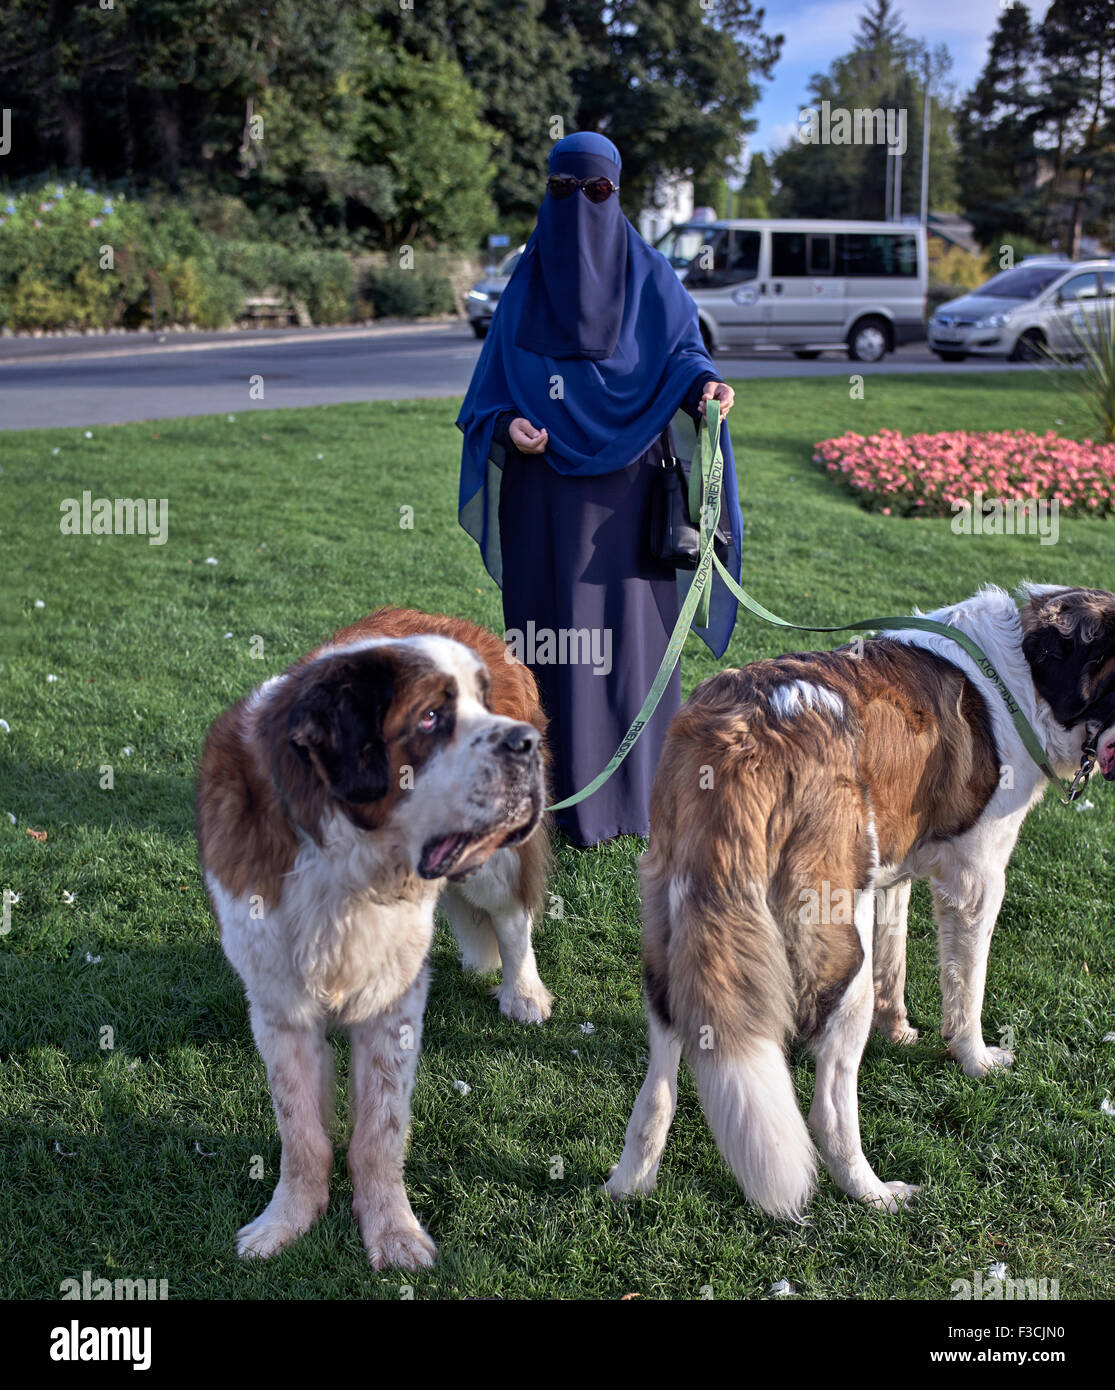 Dog walker. Middle East Muslim woman in full Burka with St. Bernard dogs. England UK. Stock Photo